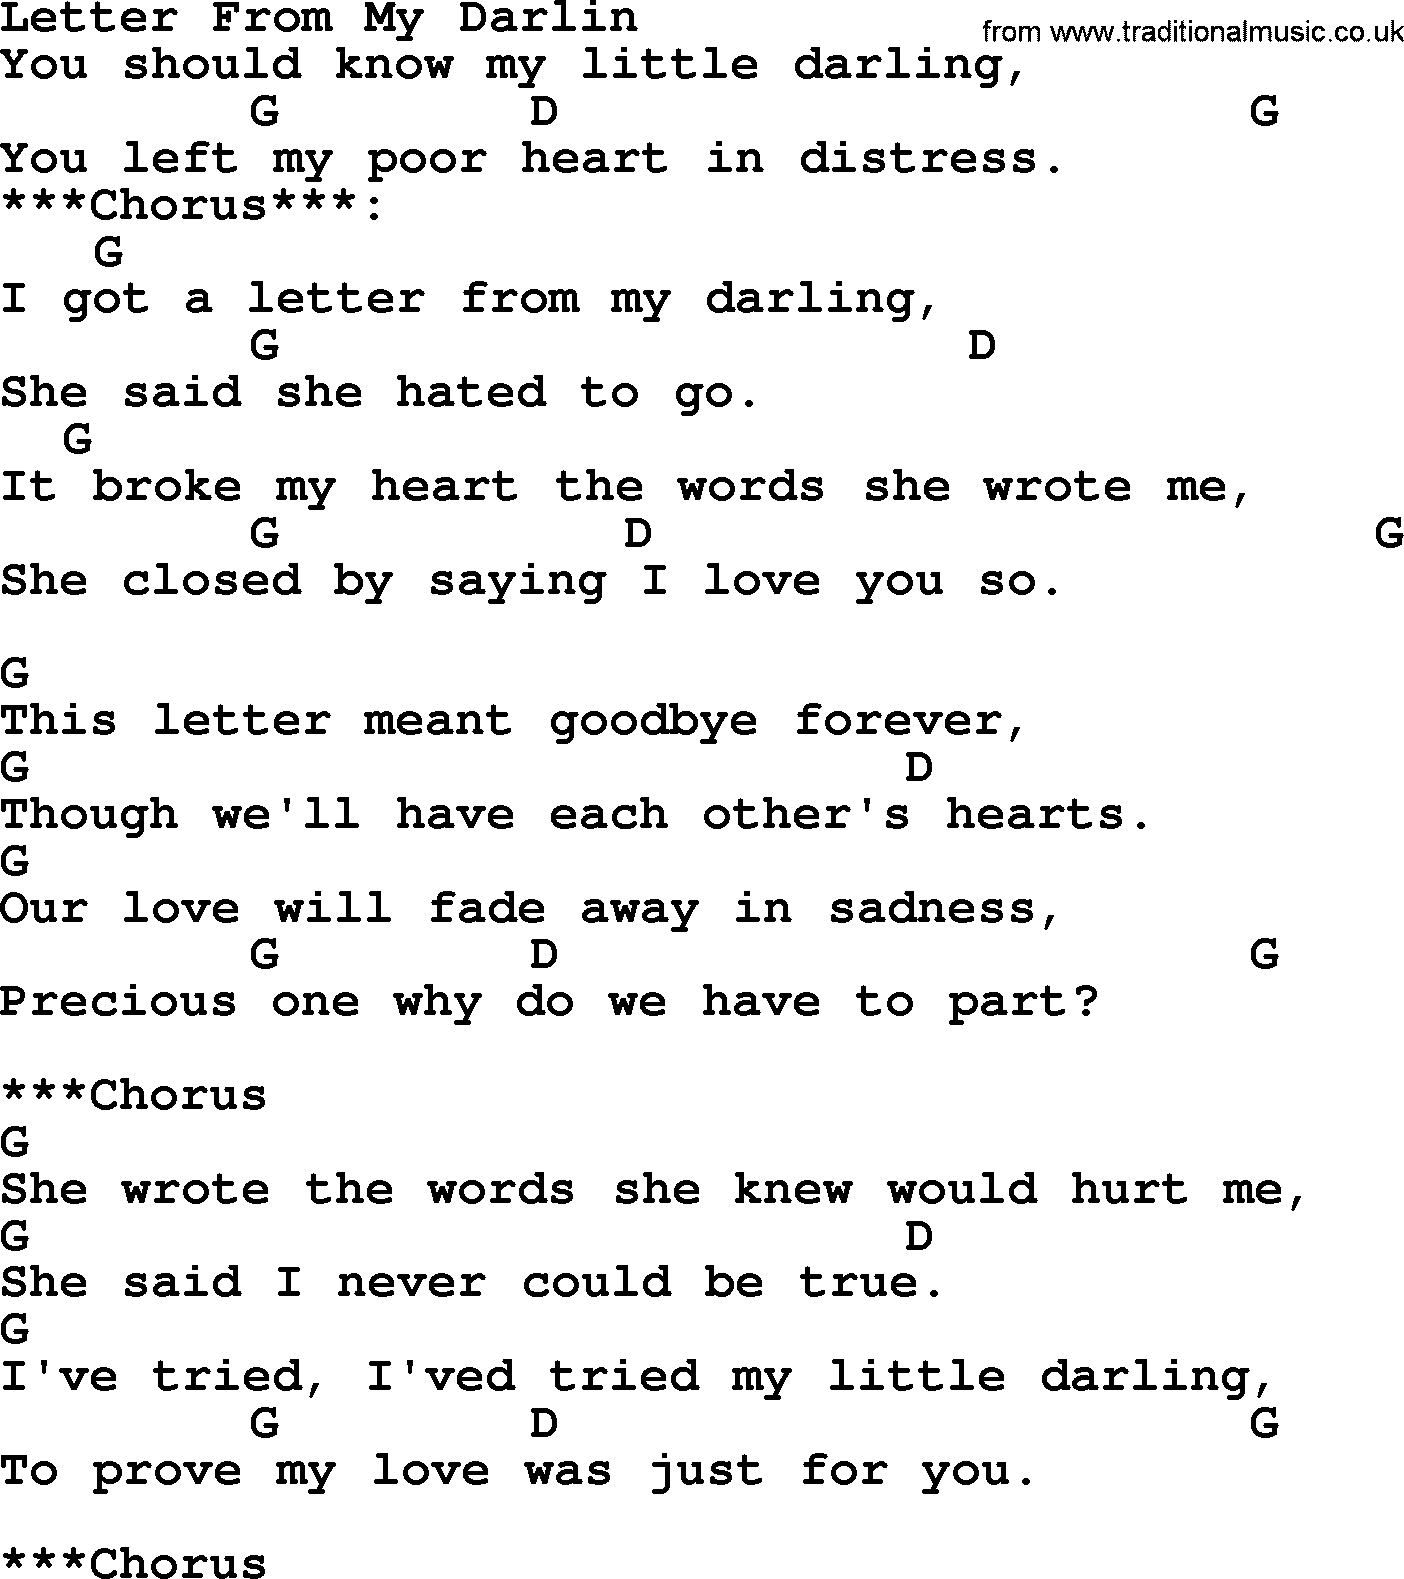 Bluegrass song: Letter From My Darlin, lyrics and chords